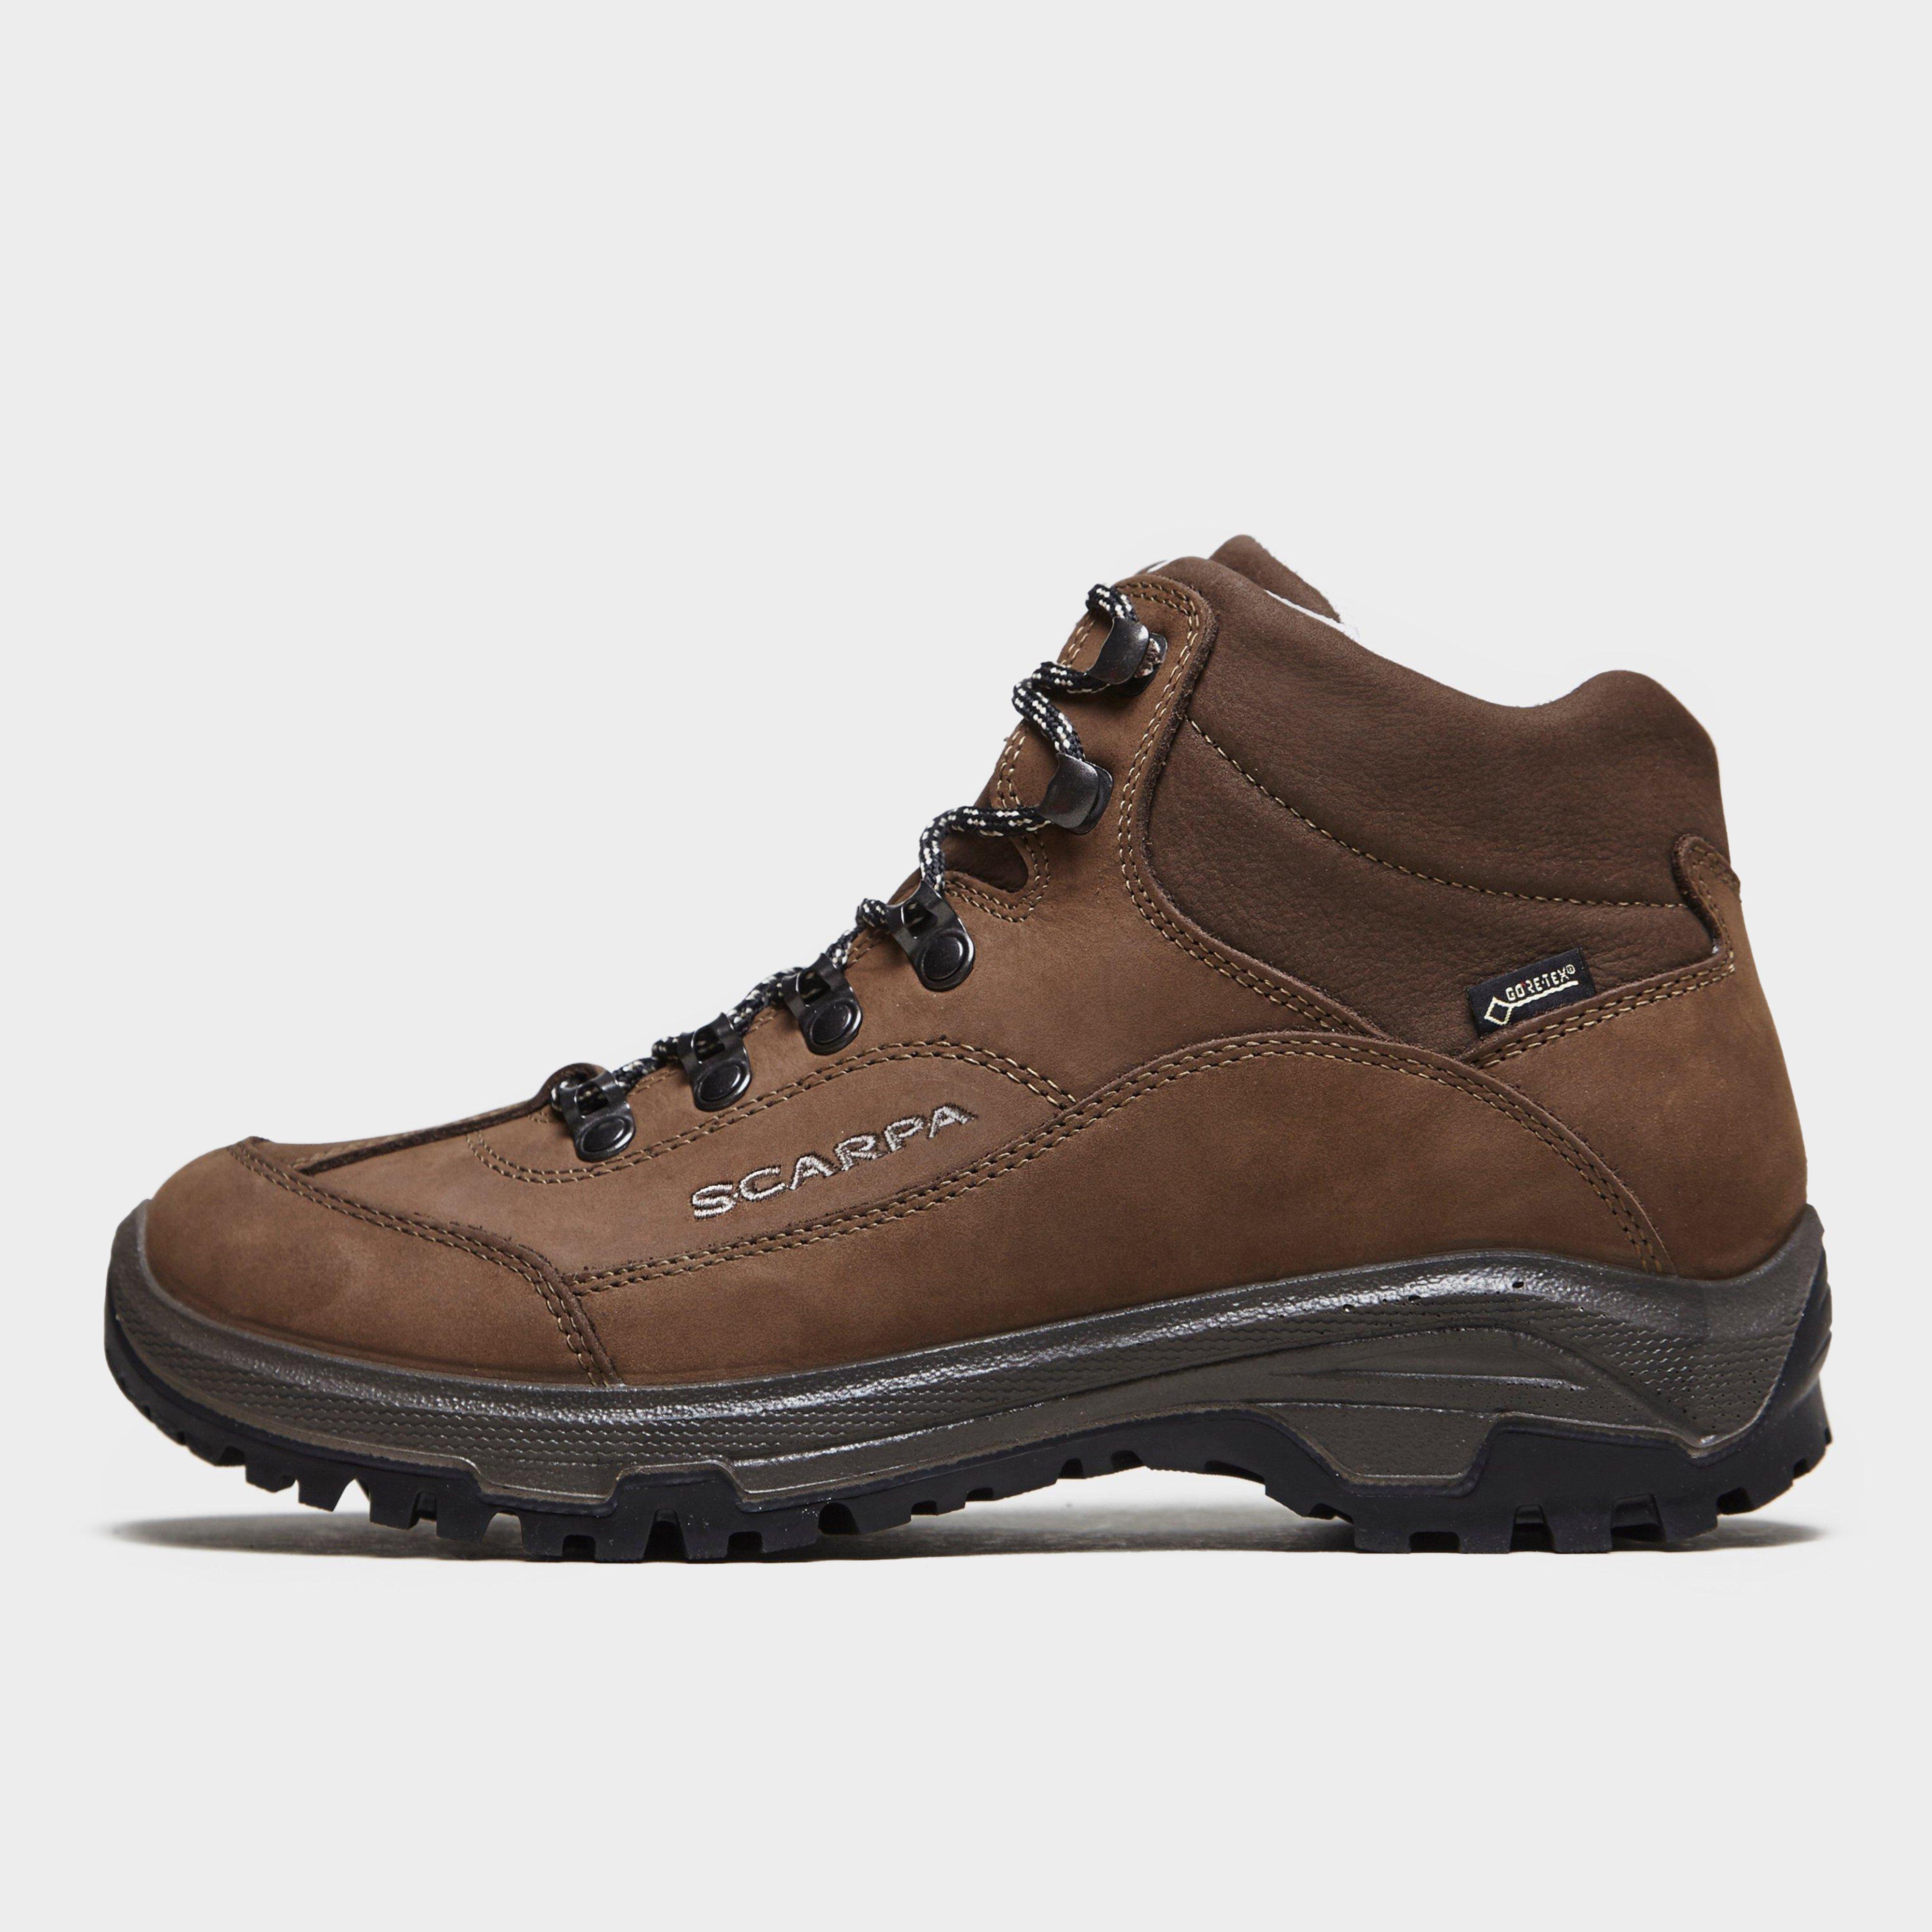 Scarpa Women's Cyrus Mid GORE-TEX Boot - Brown, Brown Review ...